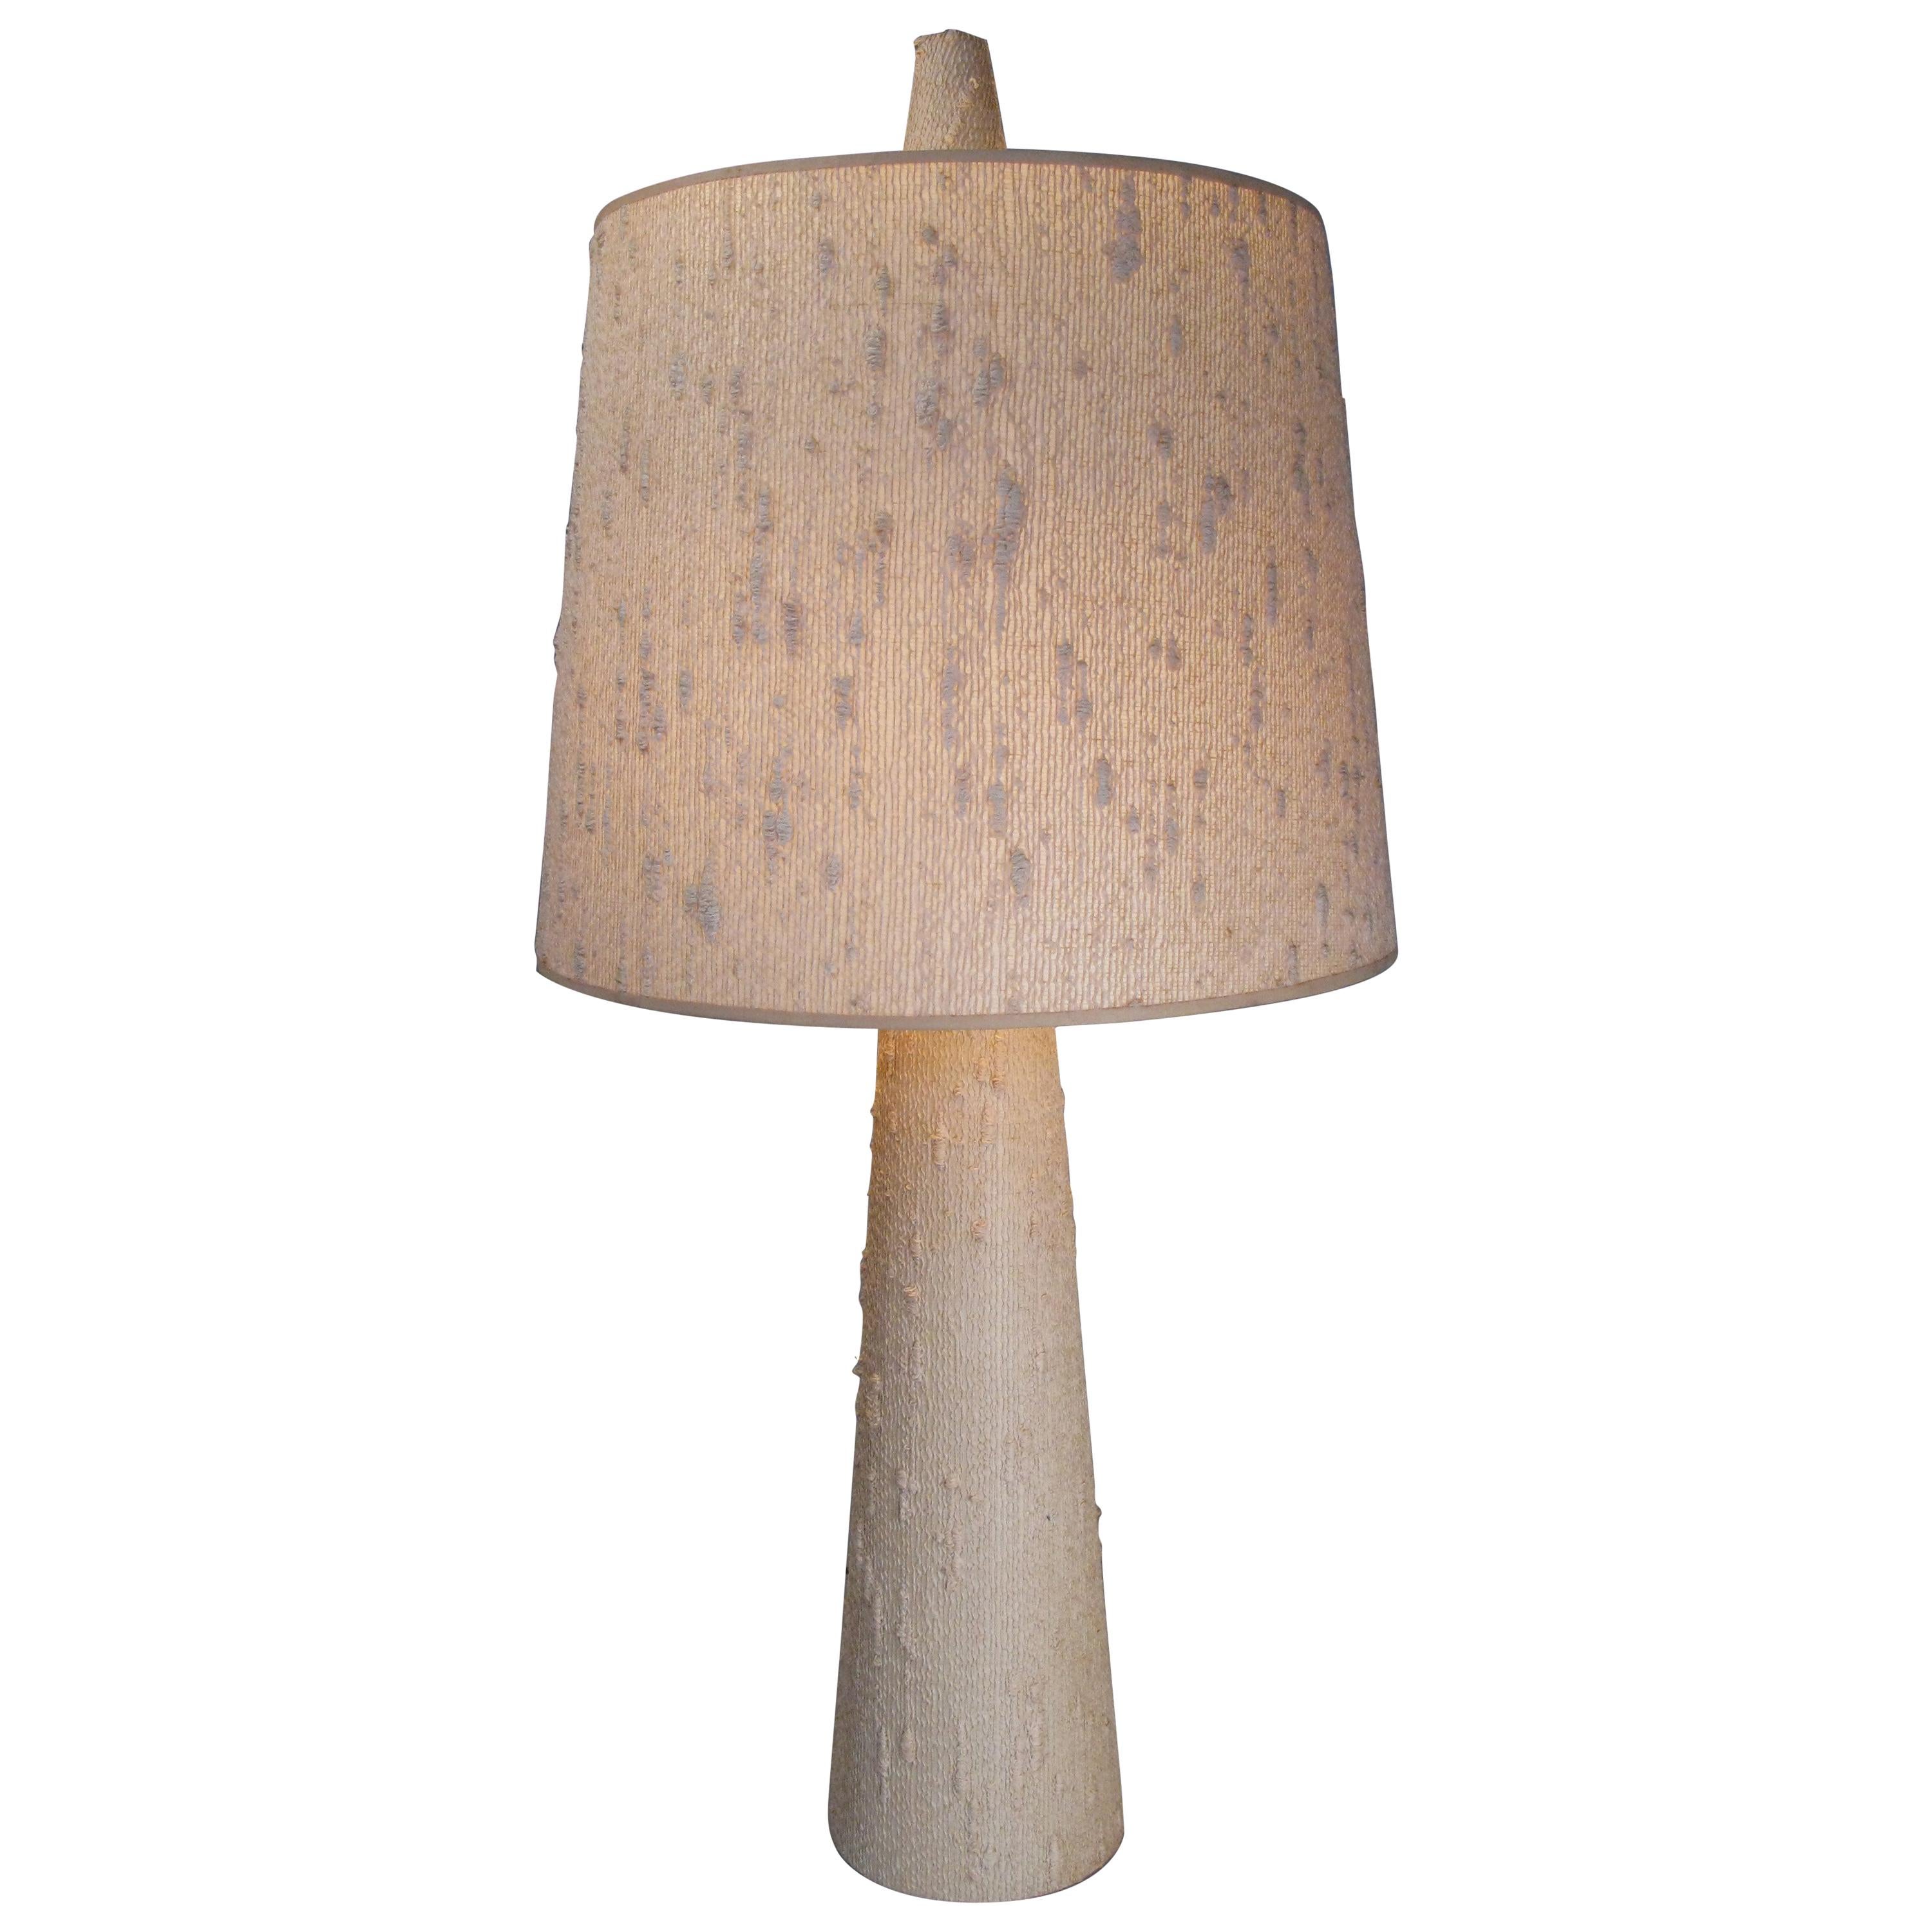 Vintage Table Lamp in Haitian Cotton with Original Shade